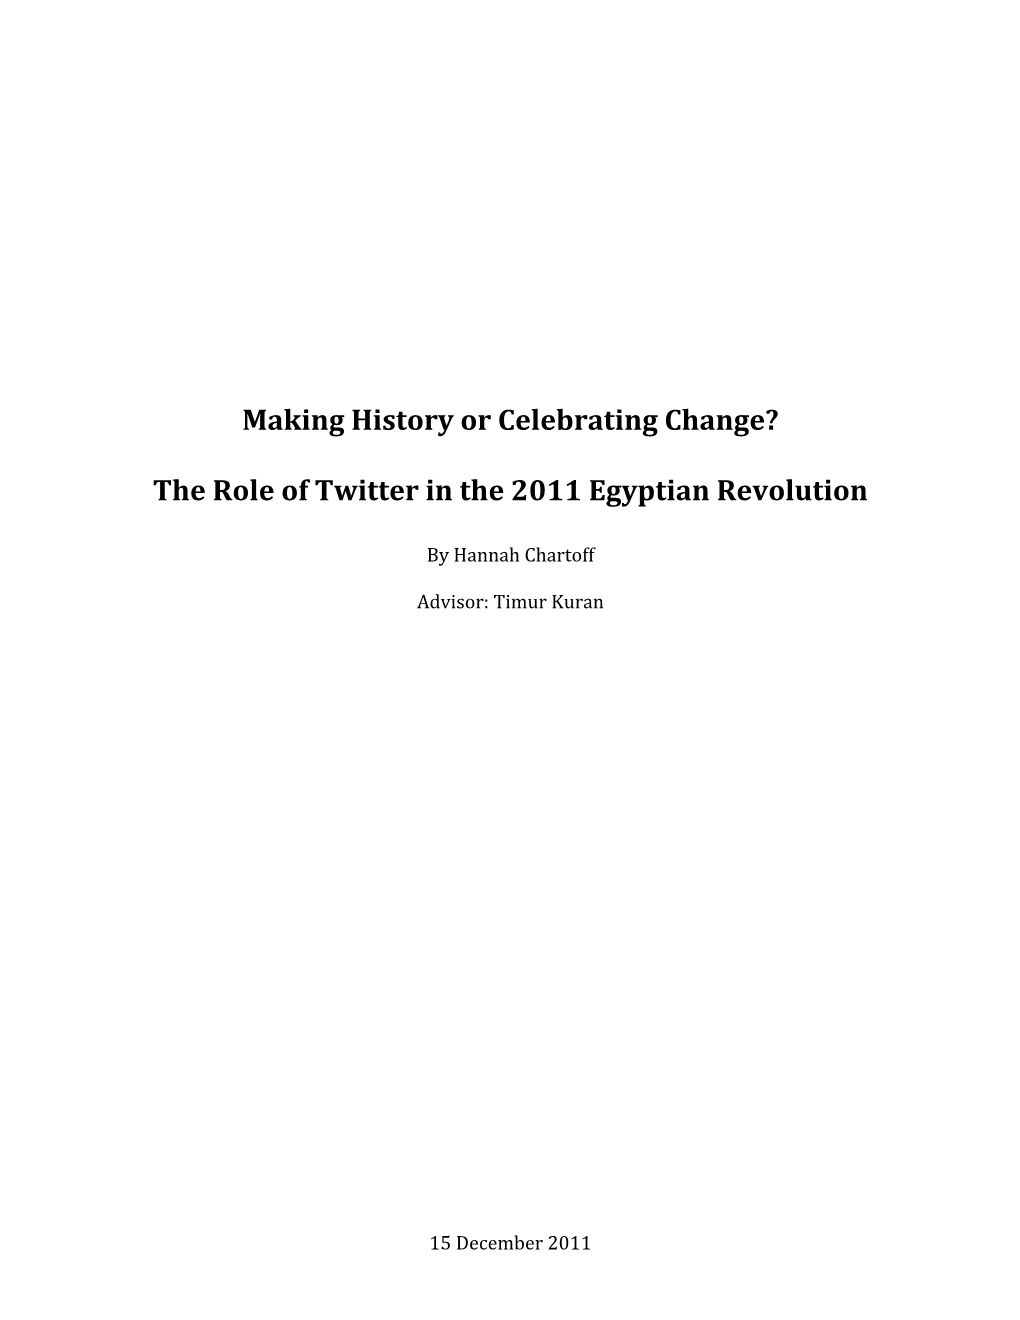 Making History Or Celebrating Change? the Role Of